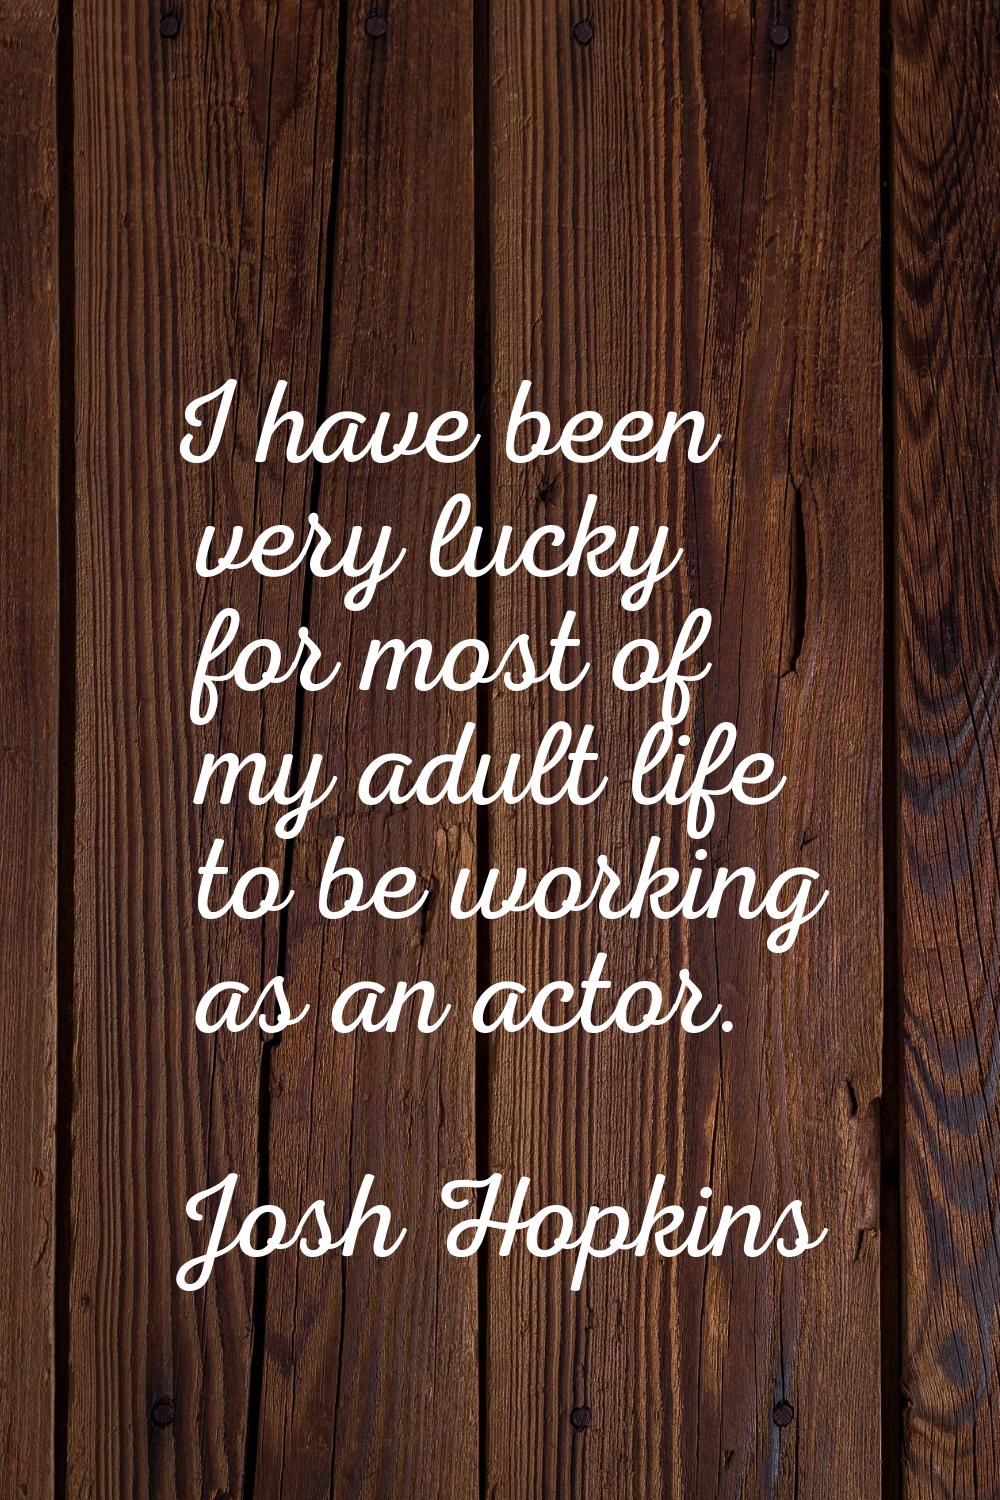 I have been very lucky for most of my adult life to be working as an actor.